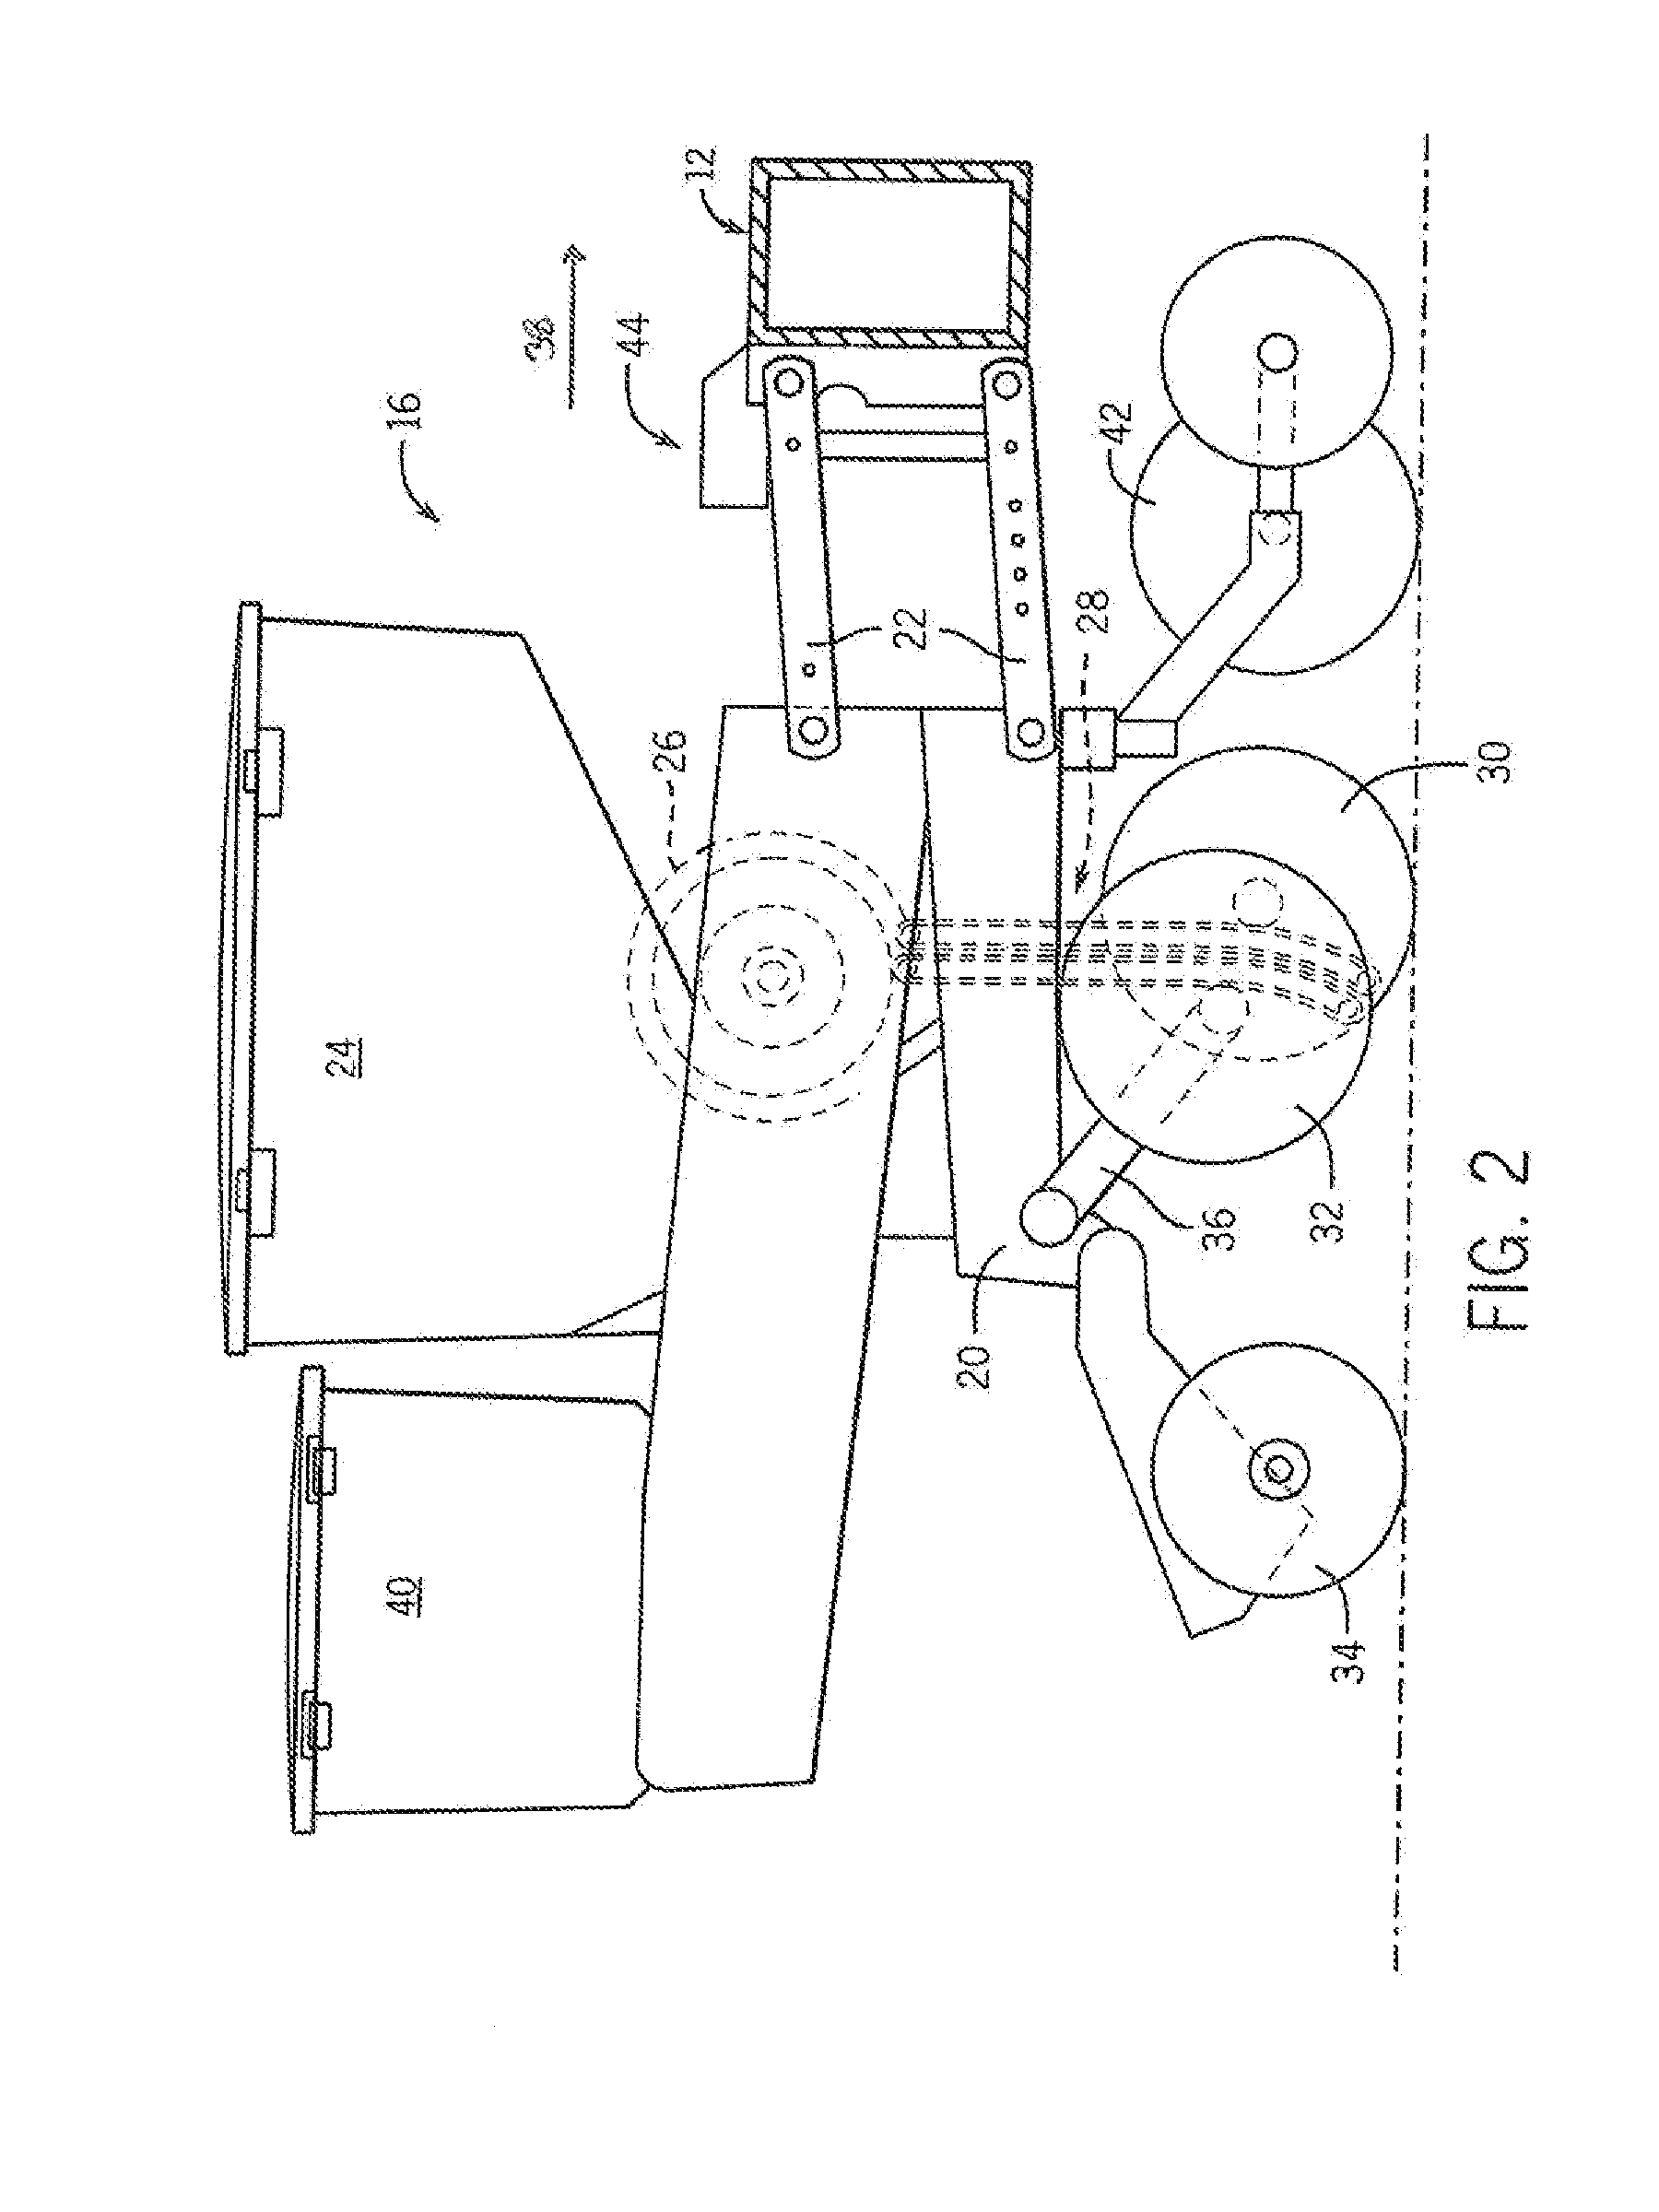 Belted Seed Transfer Mechanism